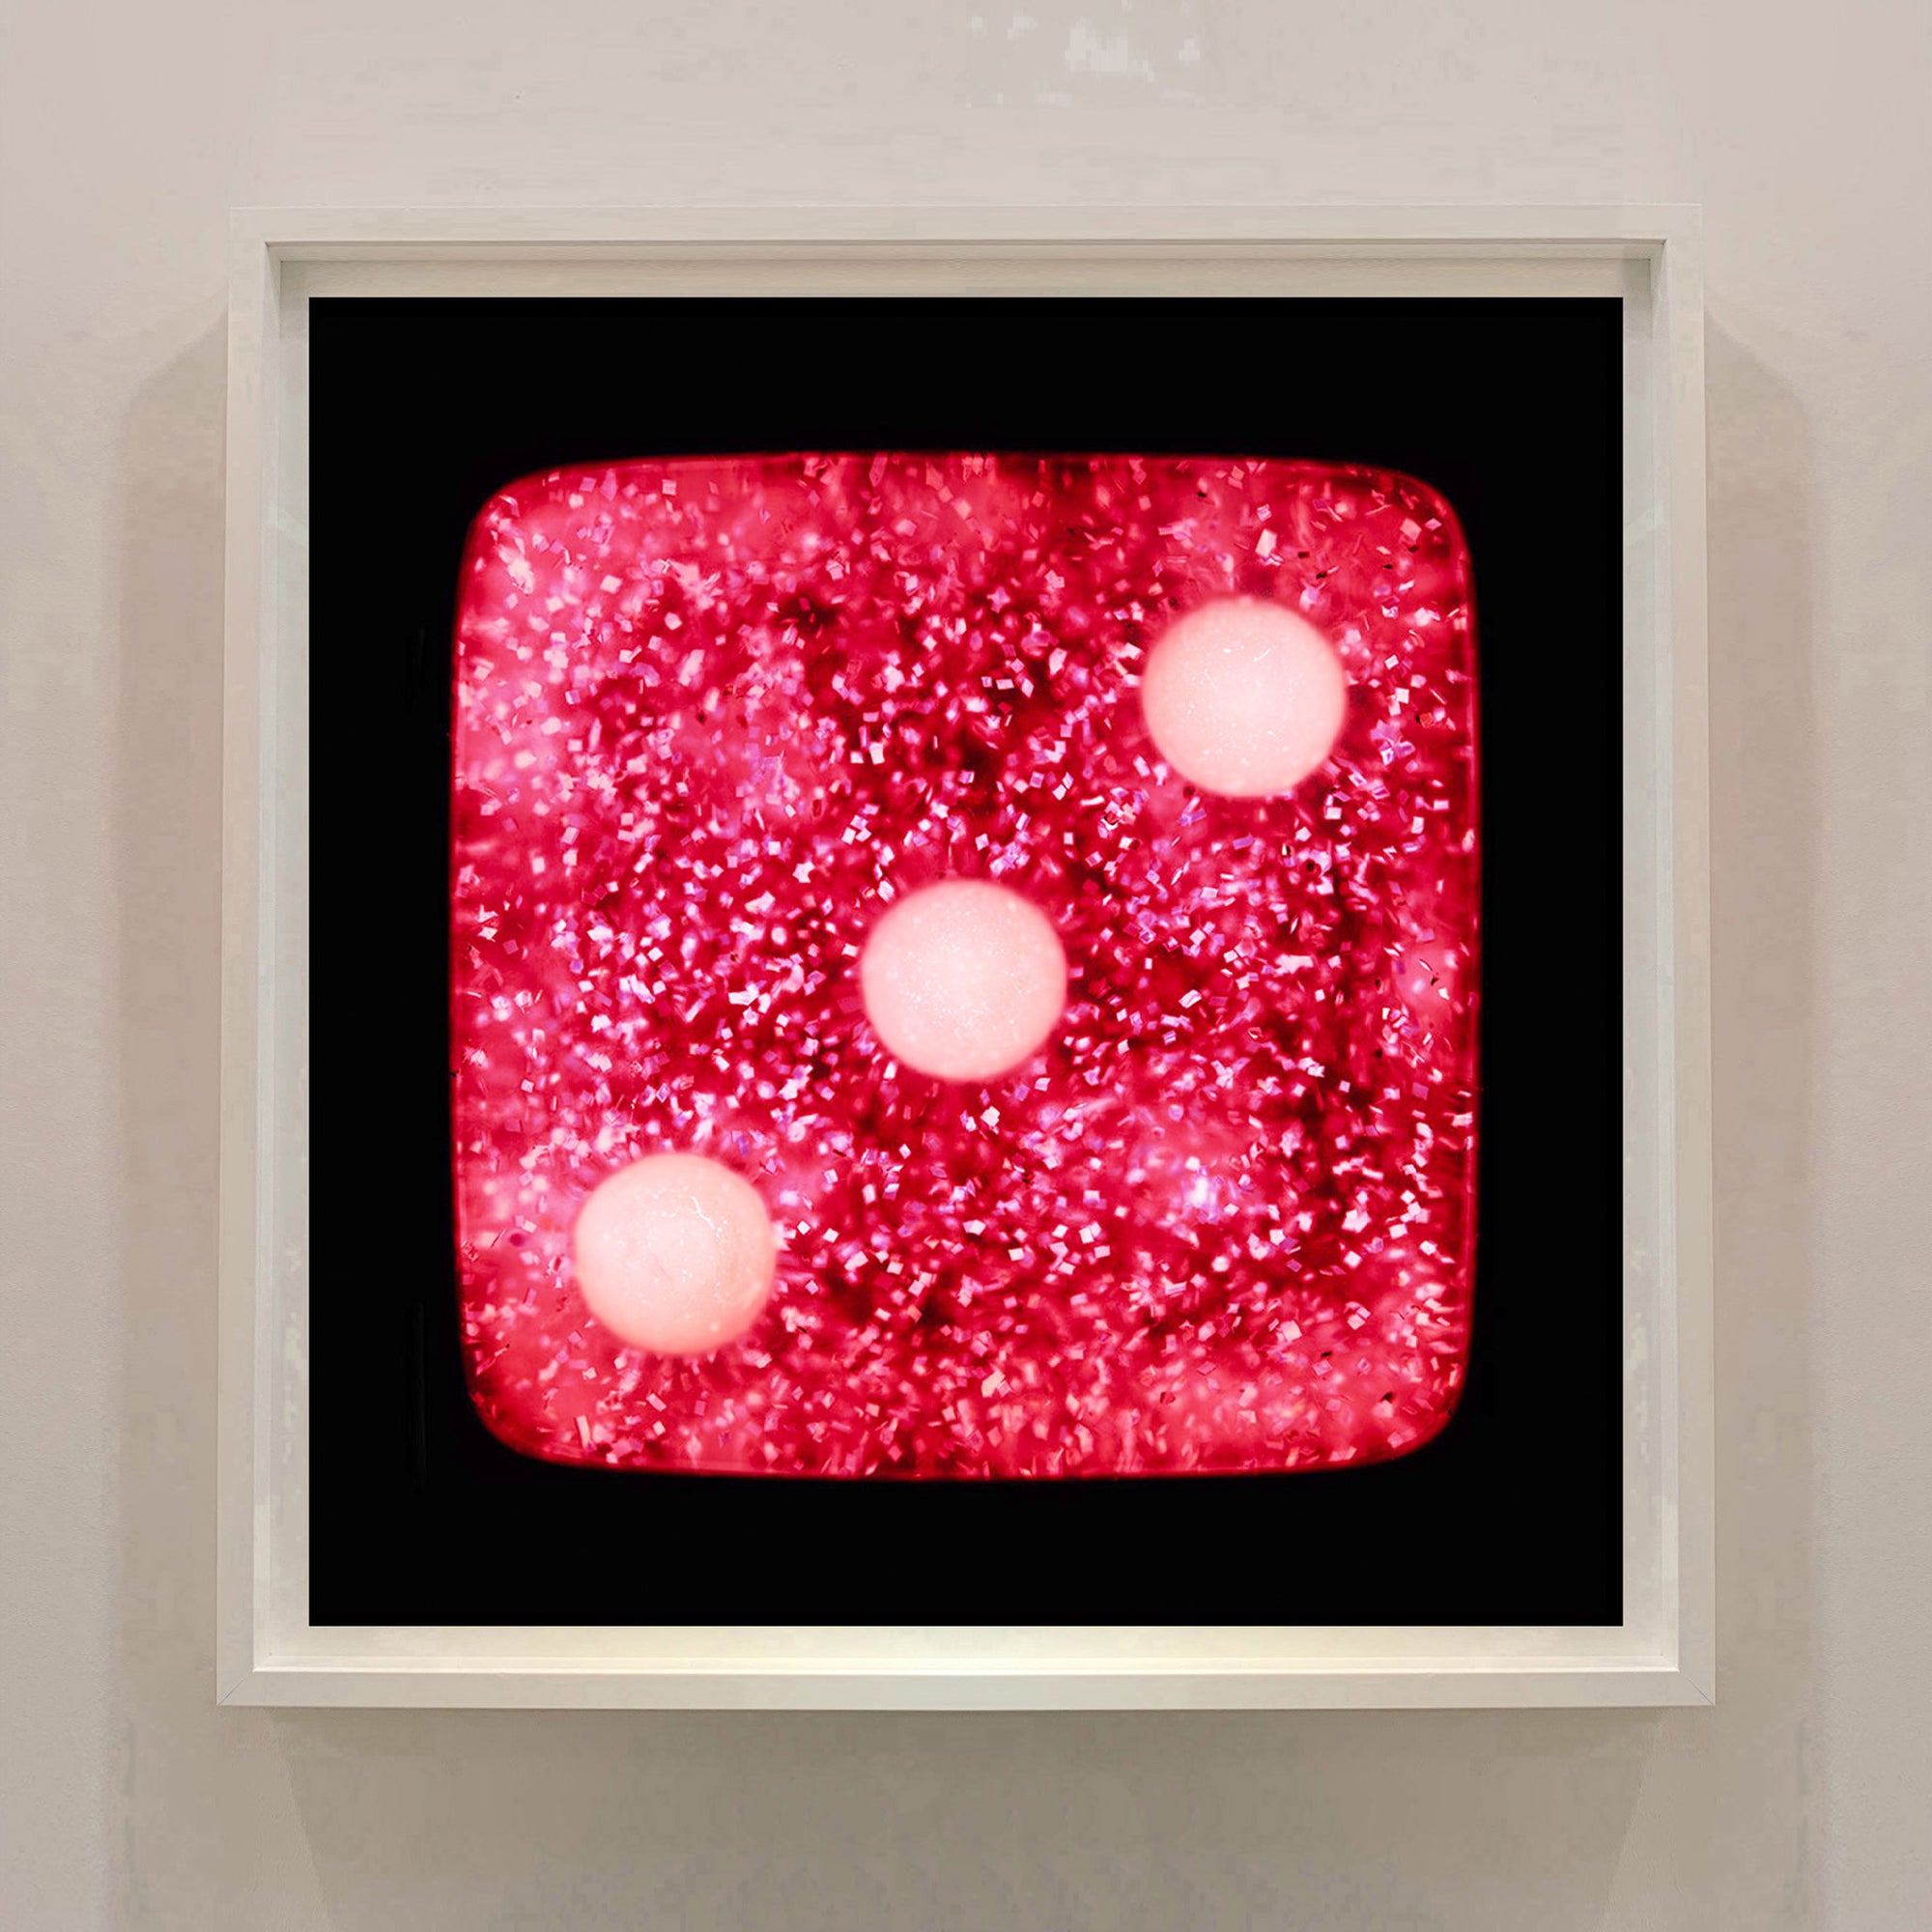 From Heidler & Heeps Dice Series, 'Raspberry Sparkles Three' is a glittery pink dice suspended on a black background, hypnotically curious in both content and technique, viewers find themselves pleasantly puzzled. Heidler & Heeps have developed their own dichromatic technique resulting in something, which is neither a straightforward photograph, nor photogram. 